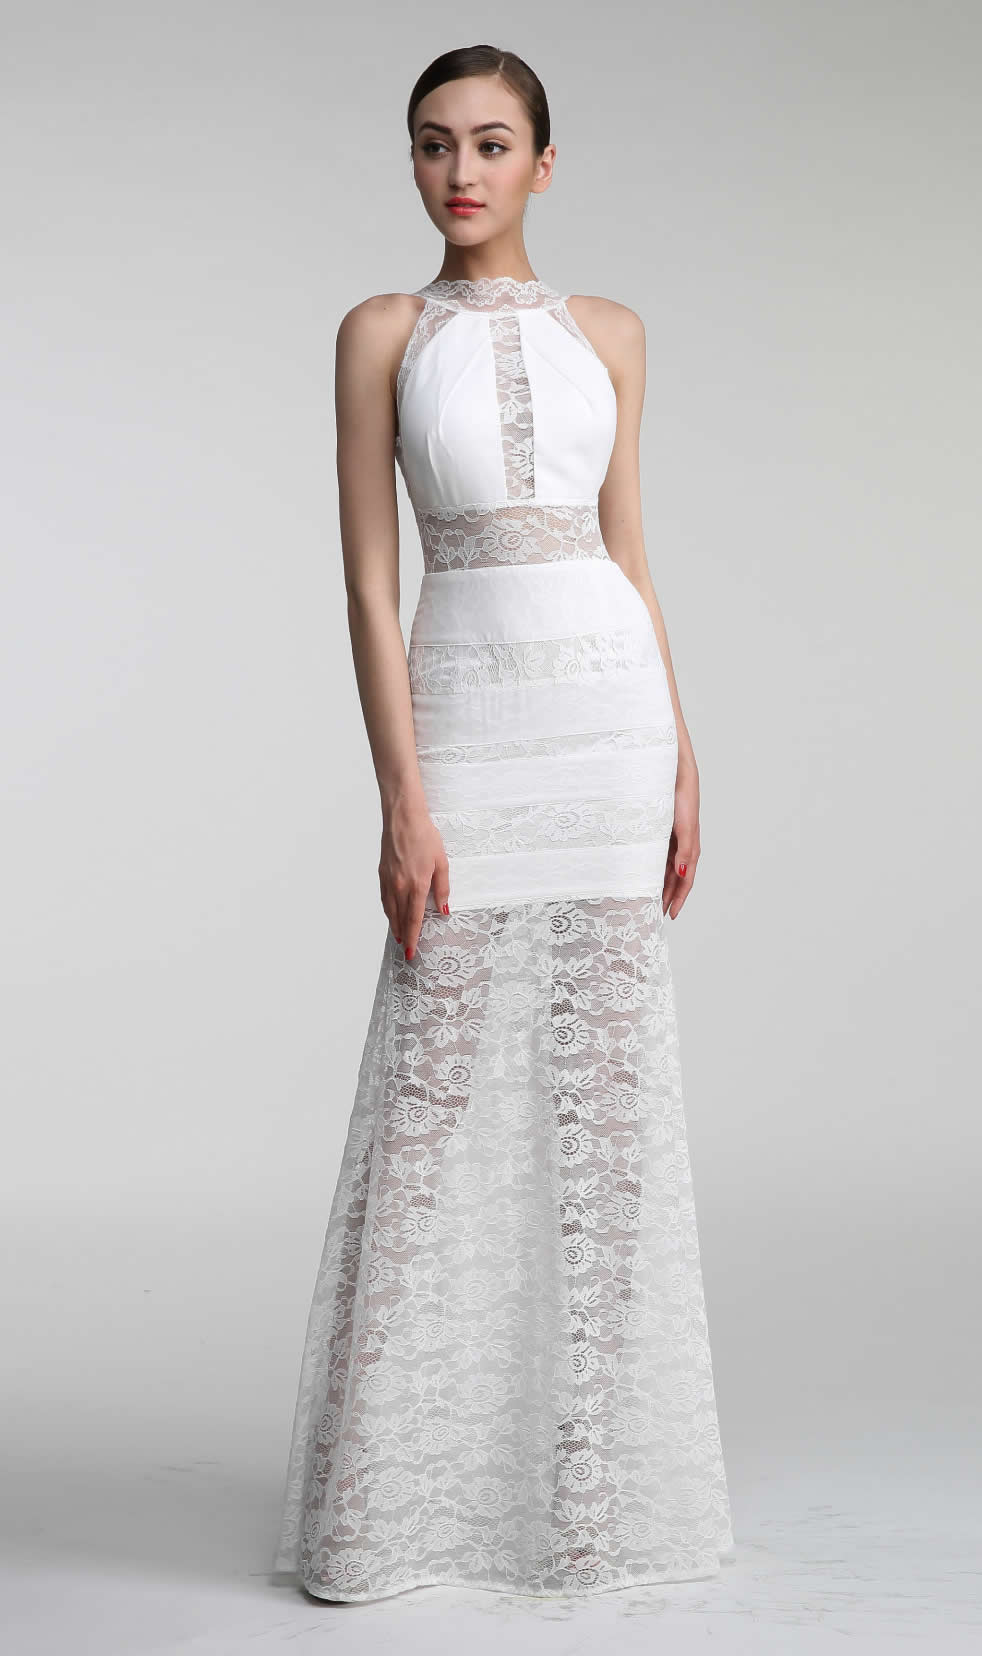 Herve Leger White Sleeveless Cut Out Gown